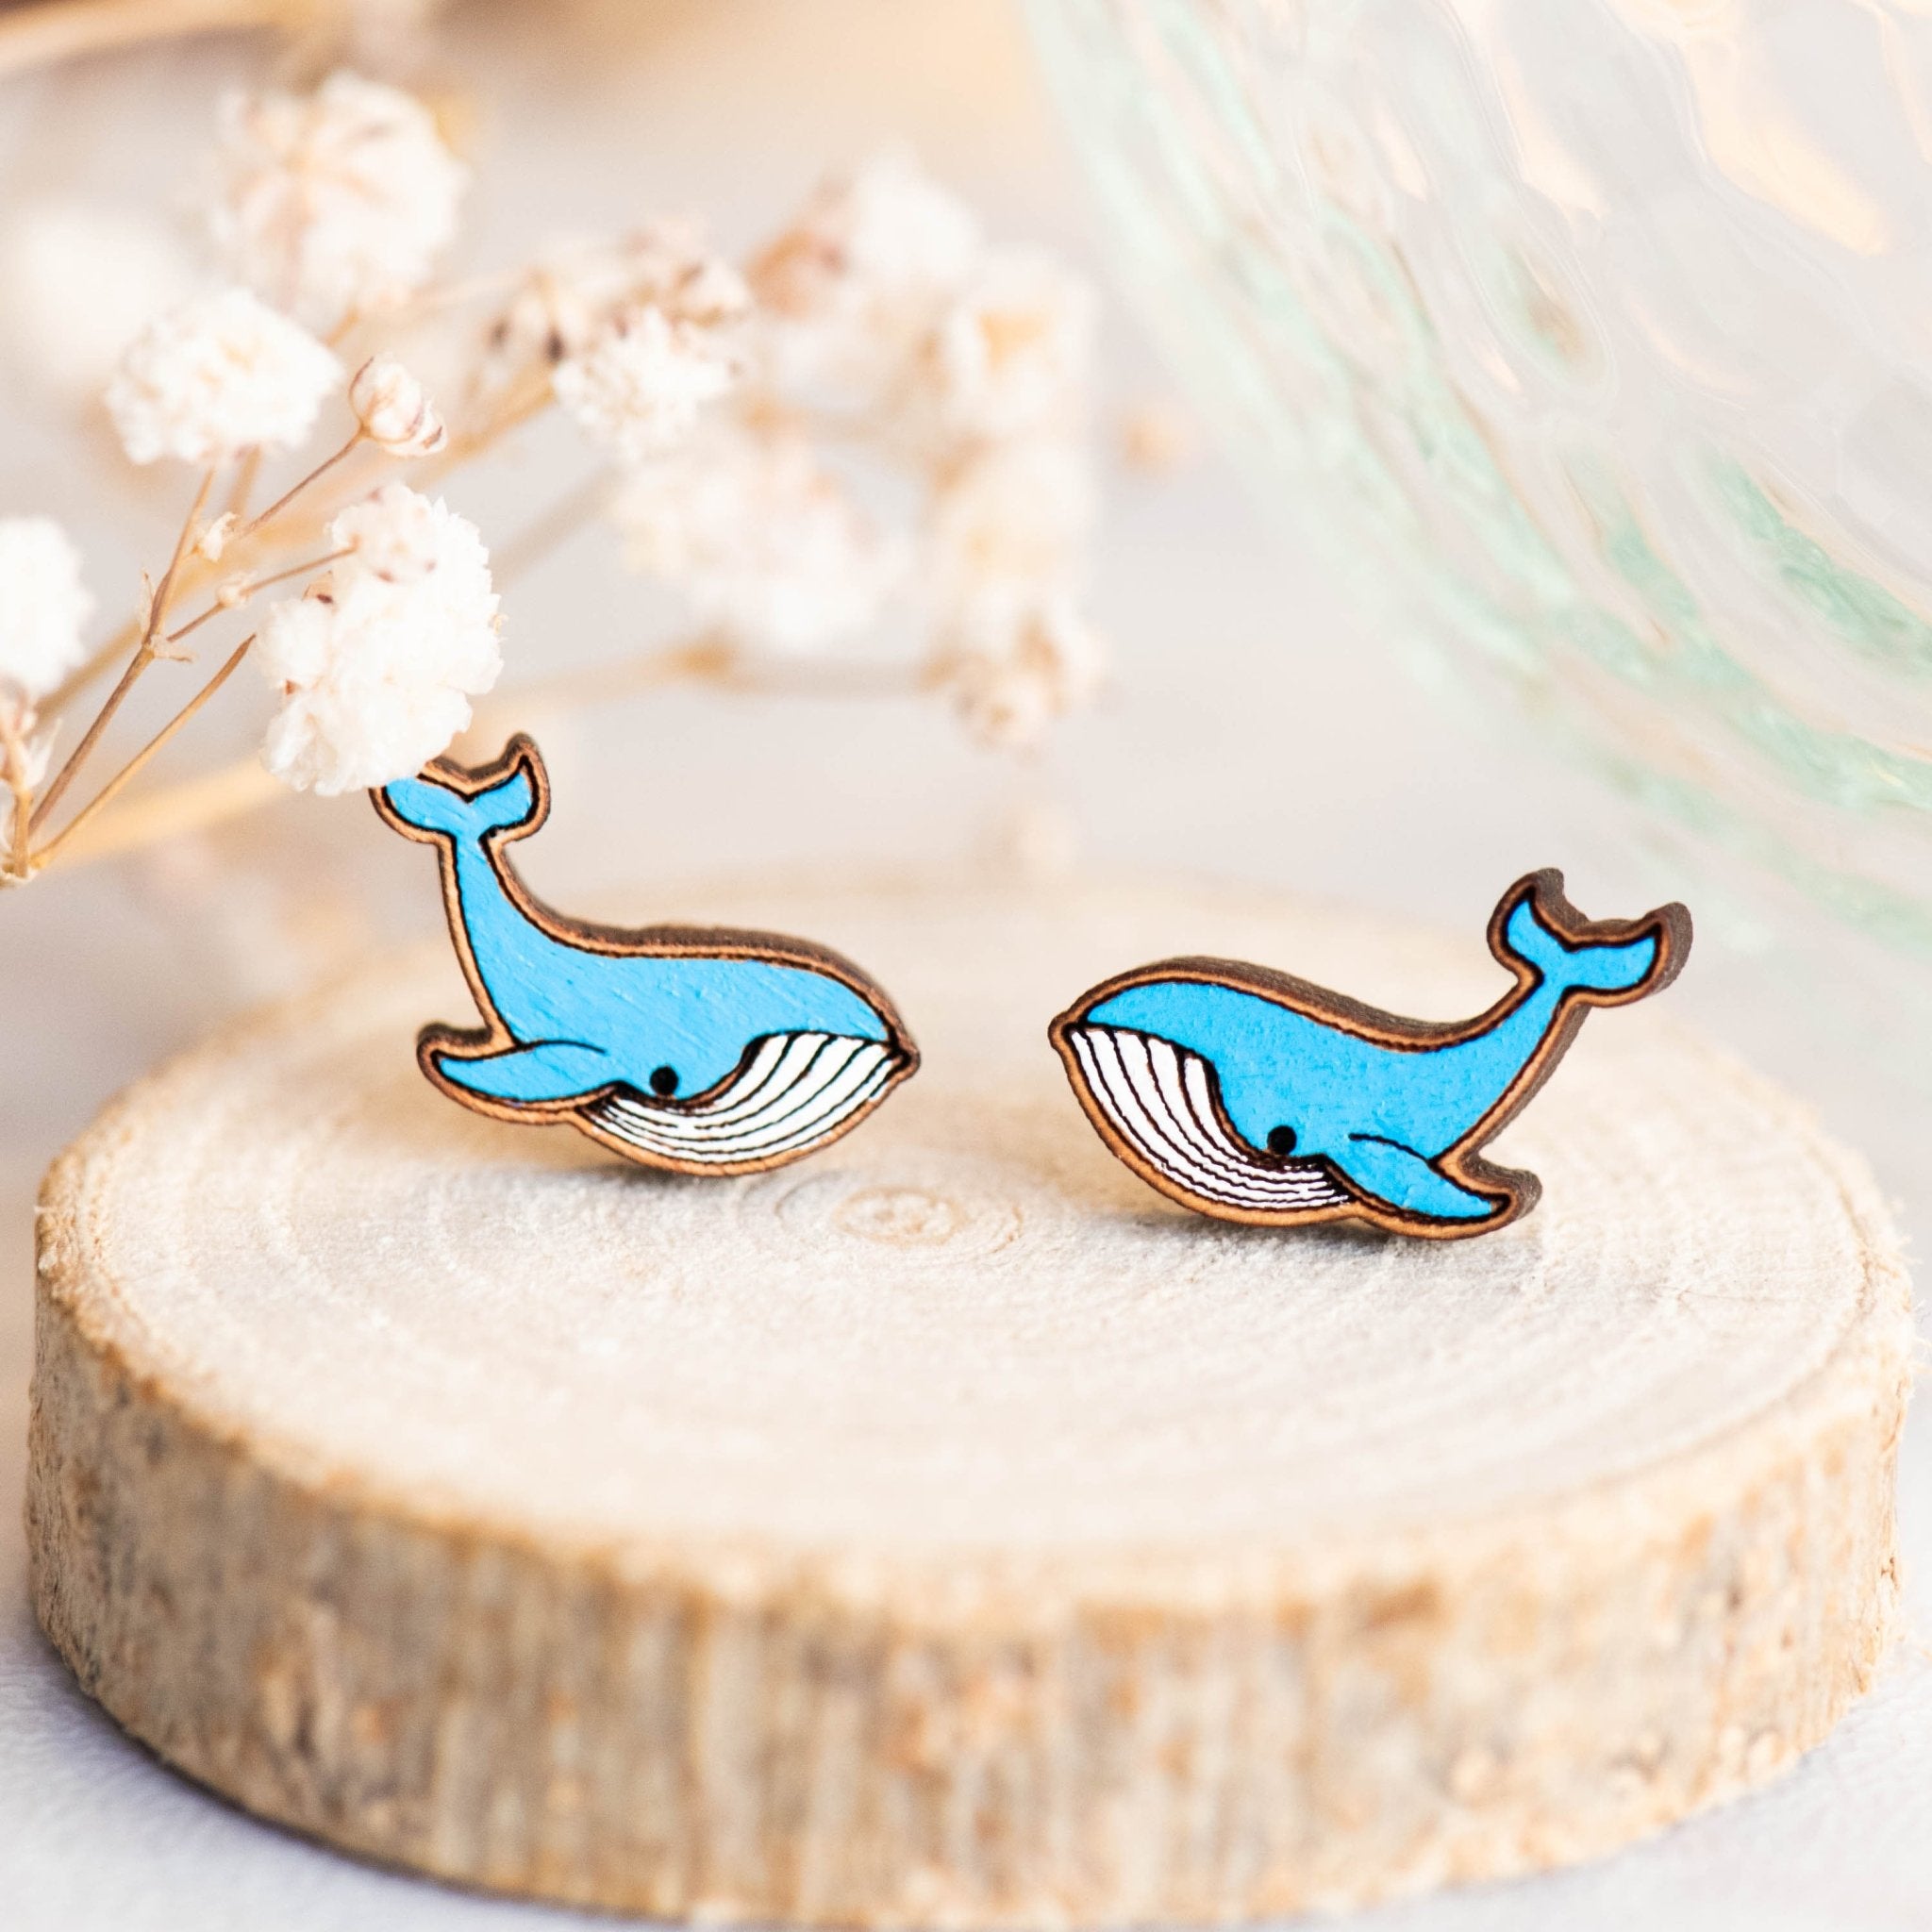 Hand-painted Blue Whale Cherry Wood Stud Earrings - PES13045 - Robin Valley Official Store